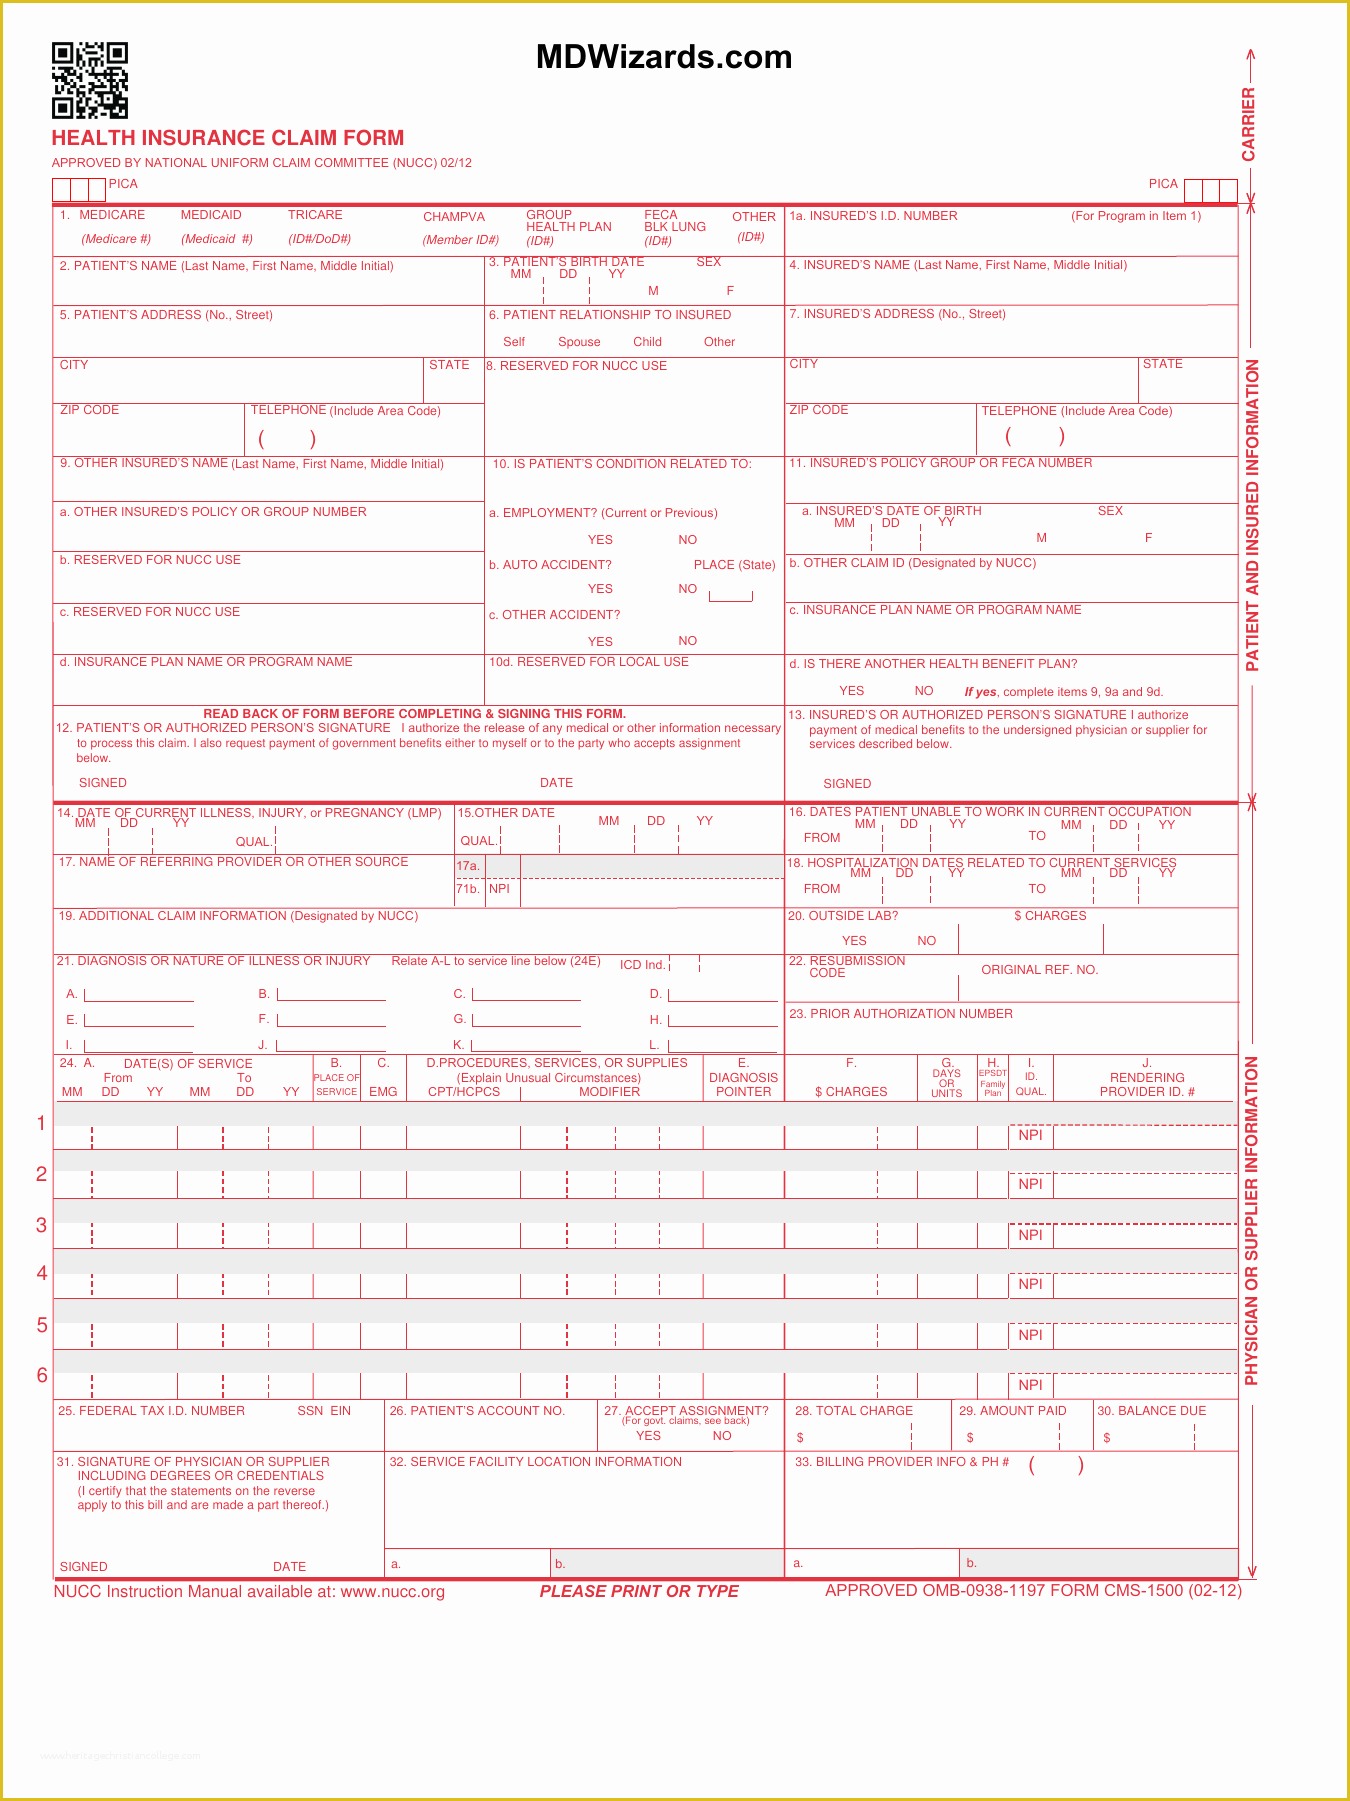 Free Cms 1500 Template for Word Of Hcfa 1500 form Olalaopx